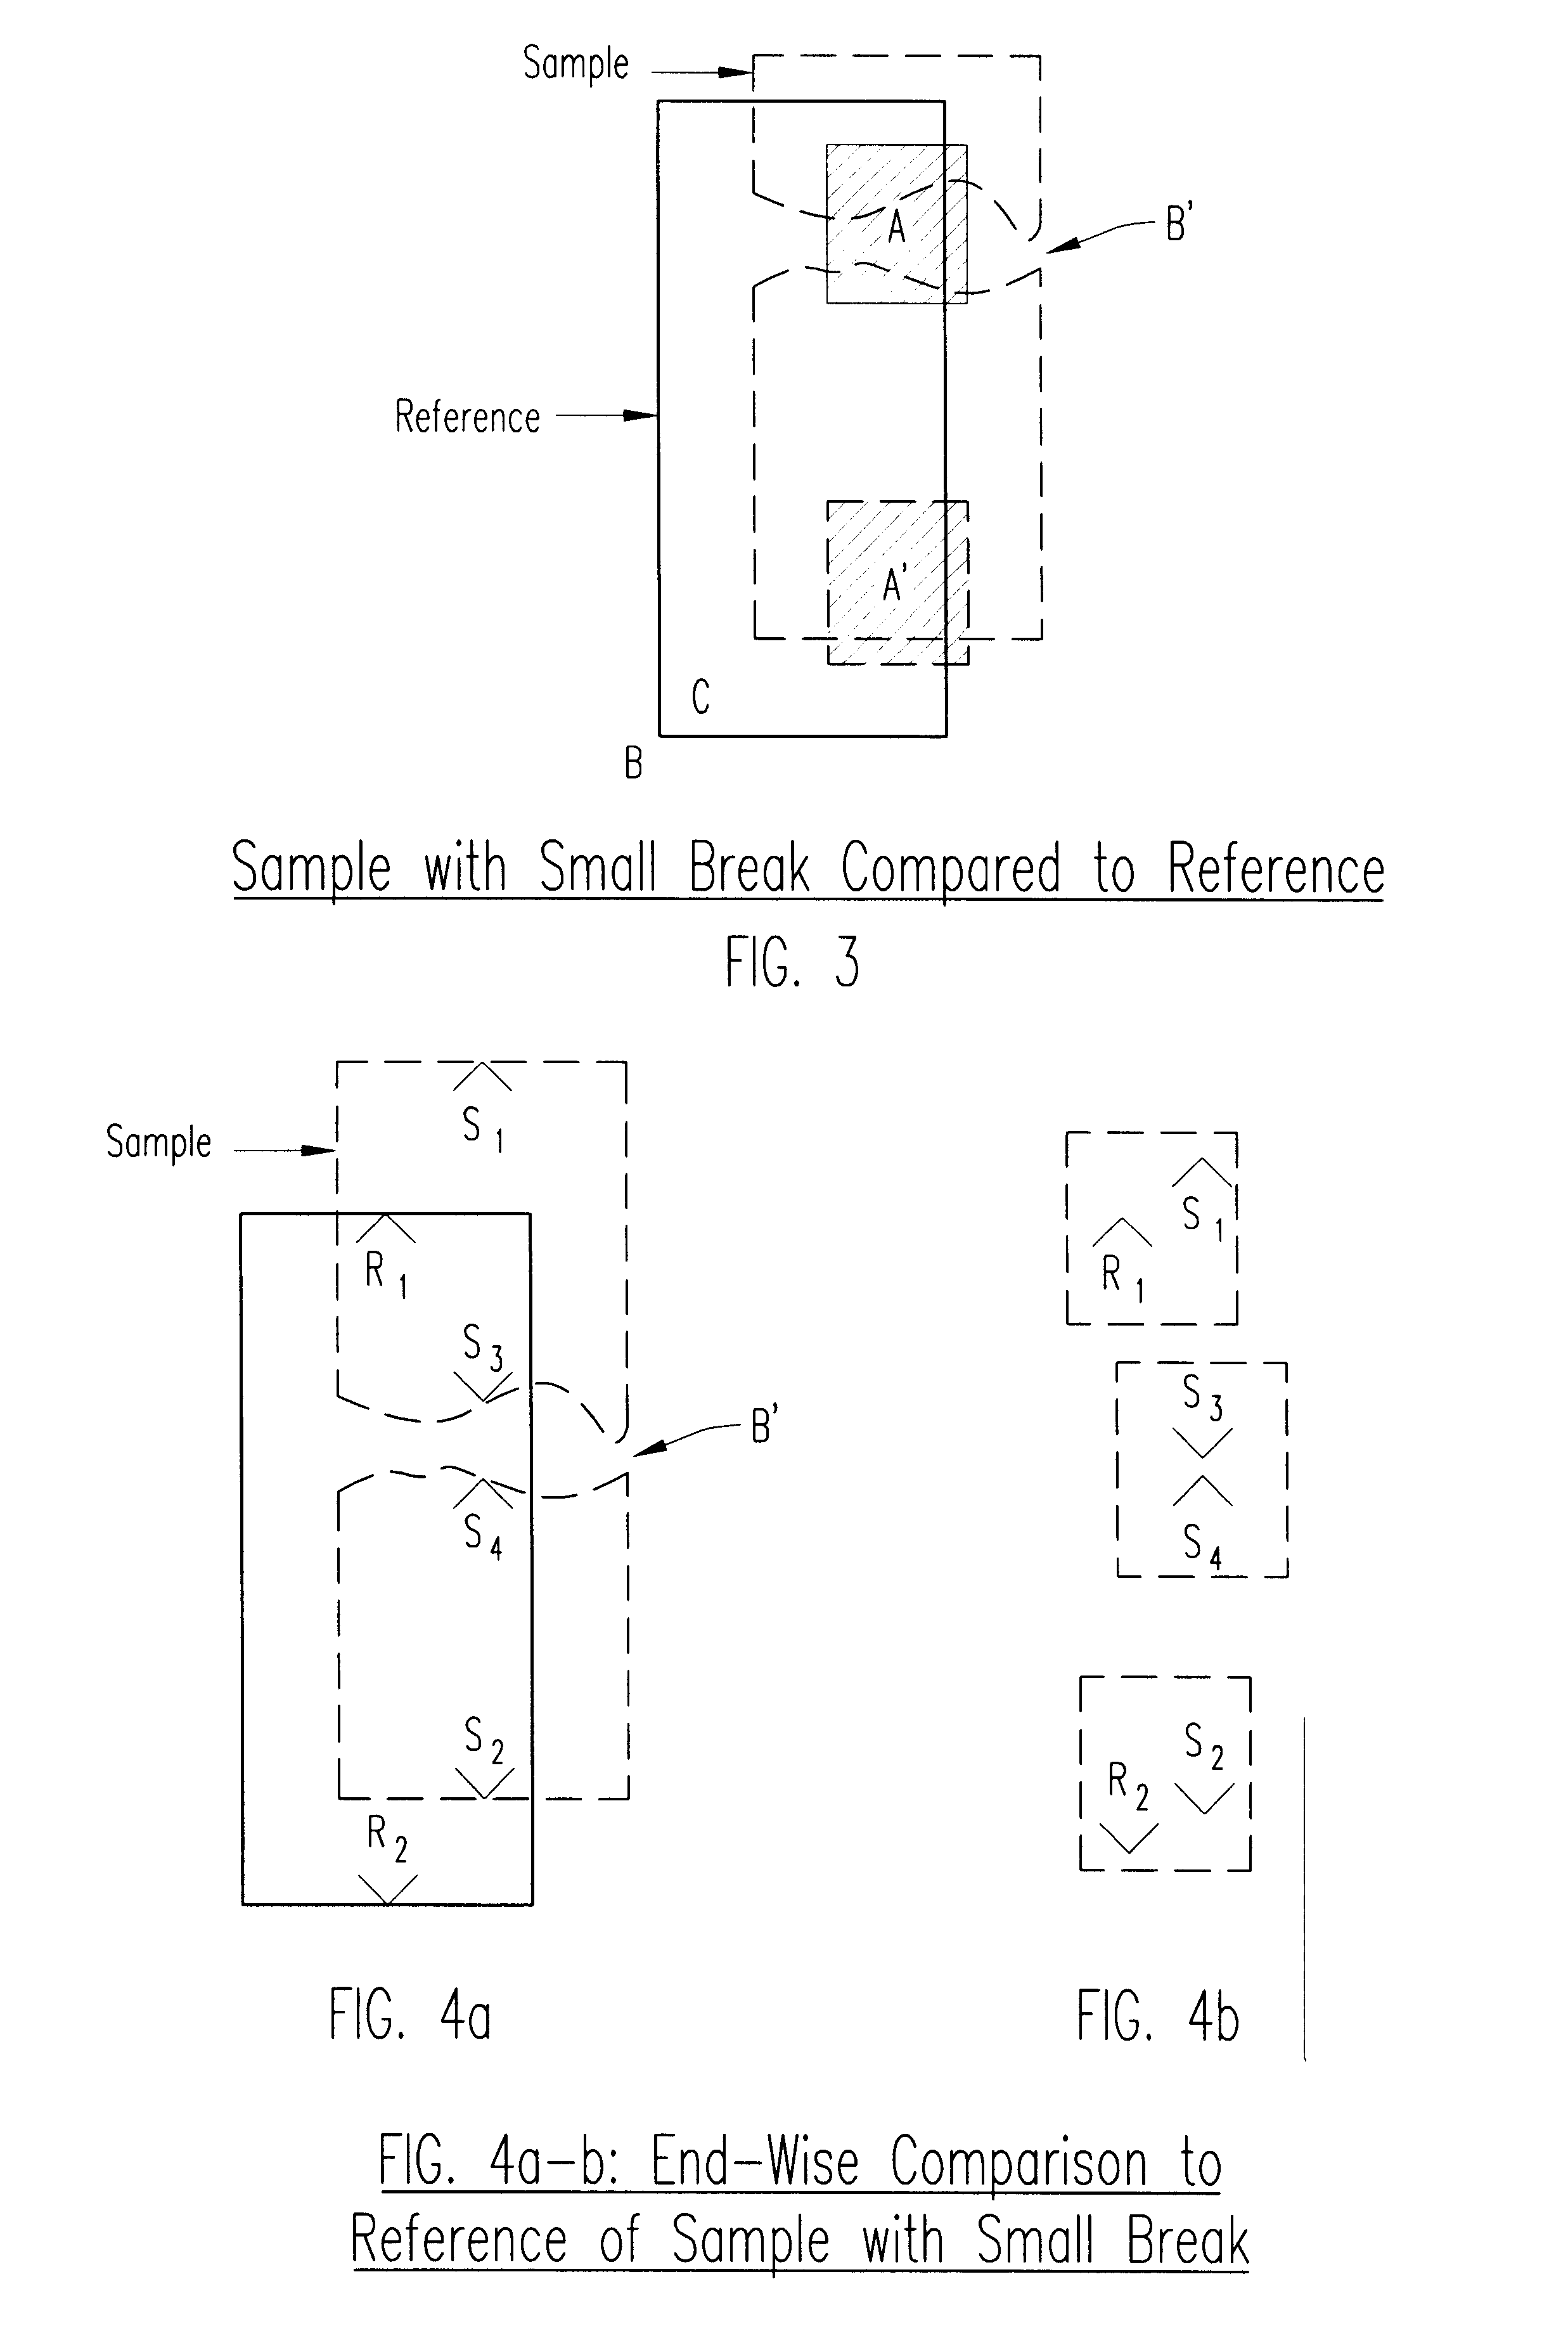 Apparatus for and method of automatic optical inspection of electronic circuit boards, wafers and the like for defects, using skeletal reference inspection and separately programmable alignment tolerance and detection parameters